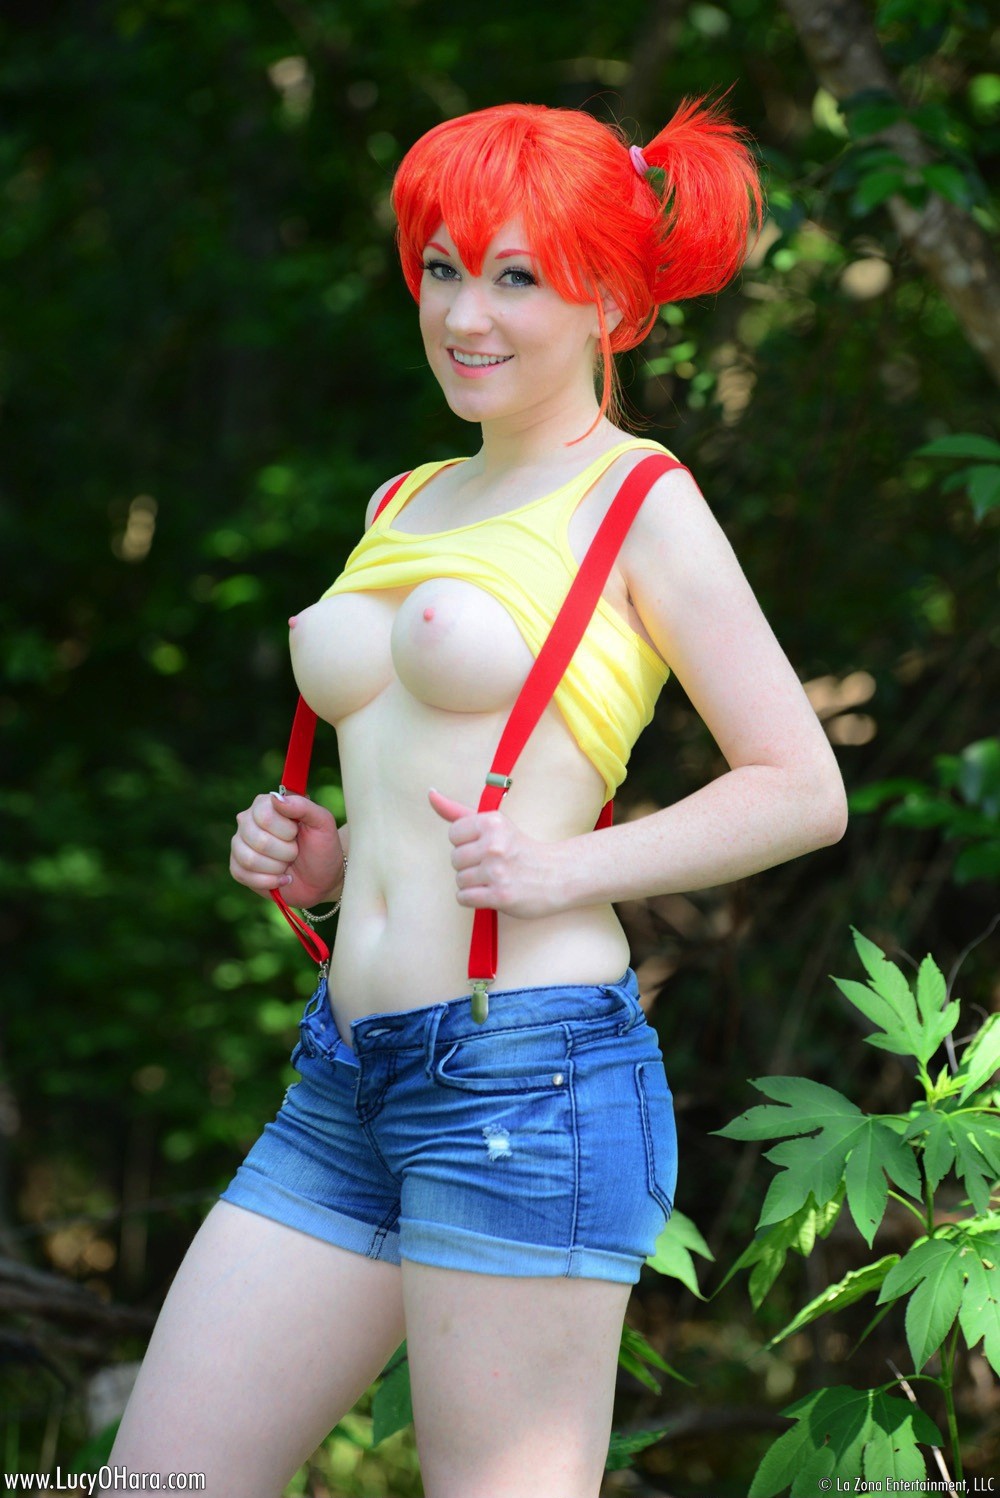 living tentacle armor tentacle hentai pictures luscious #lucyohara #misty #Pokemon